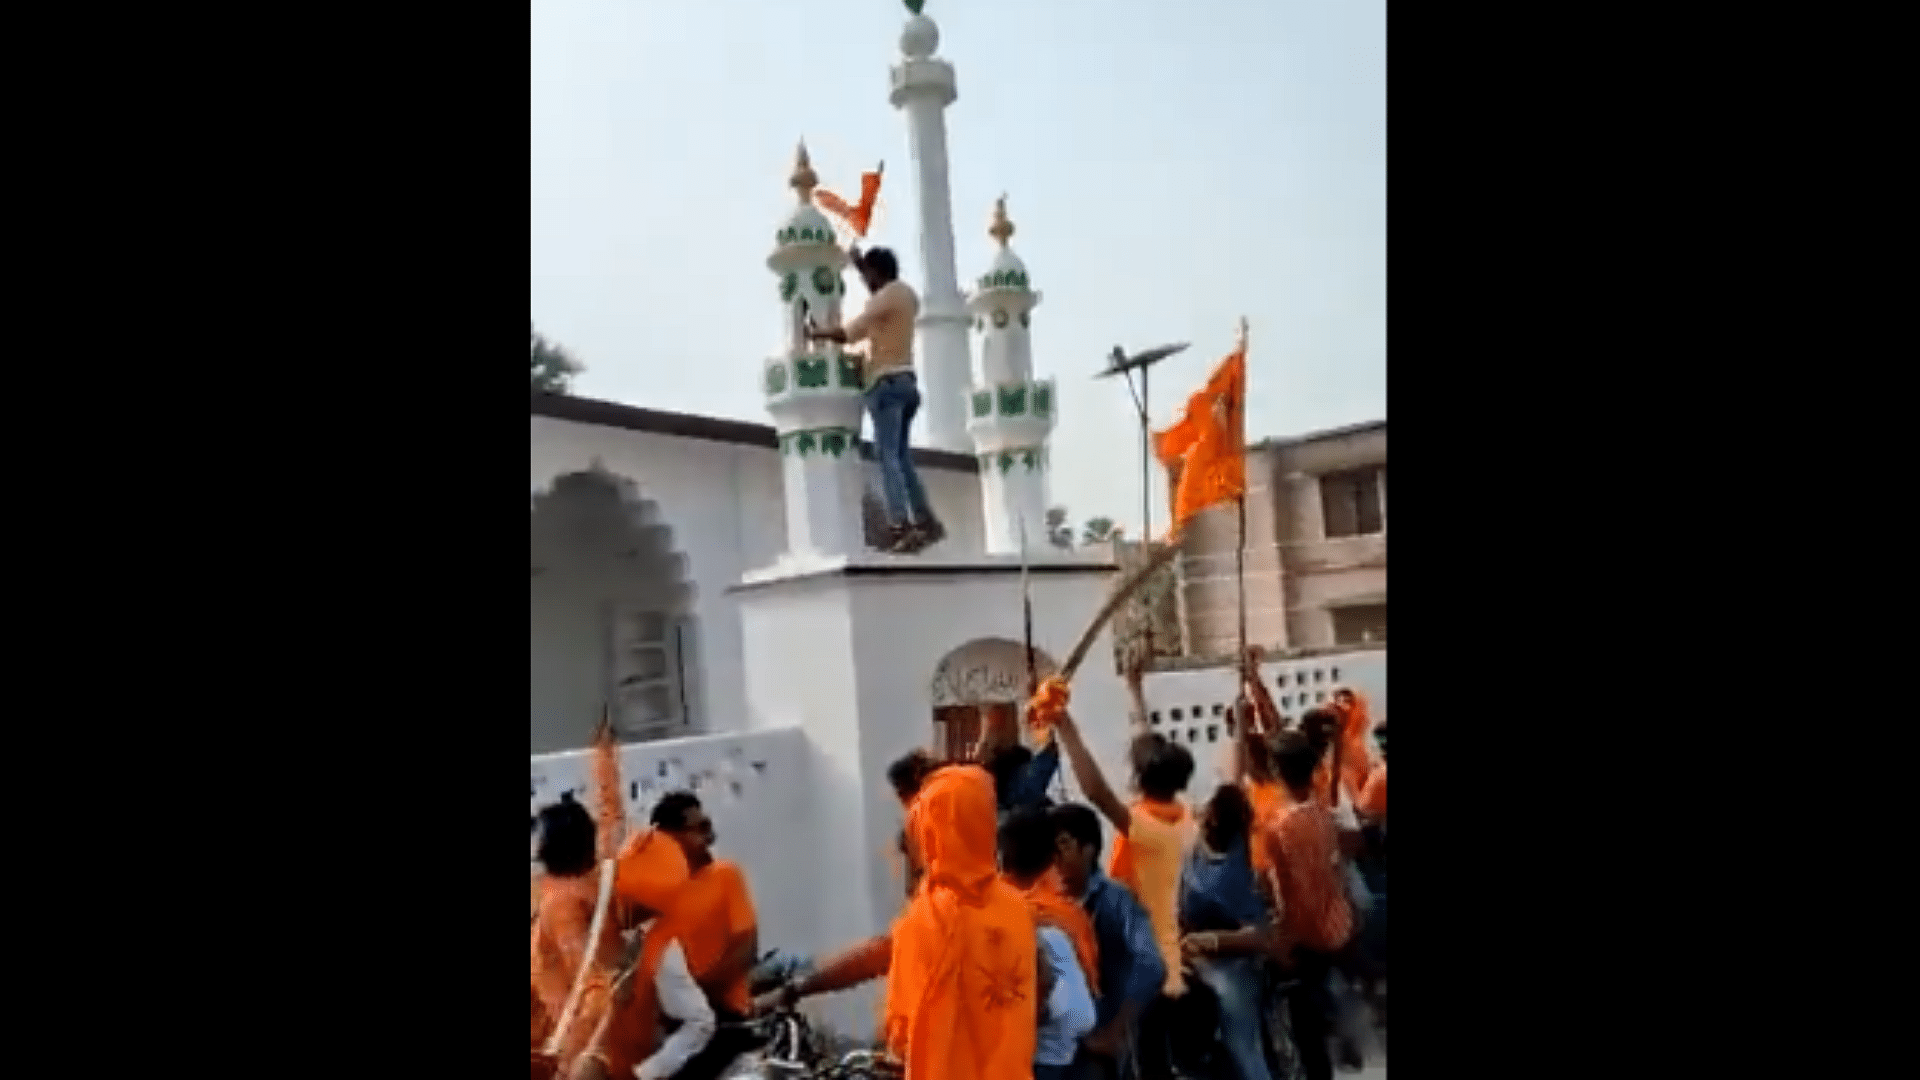 <div class="paragraphs"><p>The Bihar Police on Tuesday, 12 April, arrested three people for allegedly erecting a saffron flag atop a mosque in Muzaffarpur on Ram Navami day, news agency ANI reported Senior Superintendent of Police (SSP), Jayant Kant, as saying.</p></div>